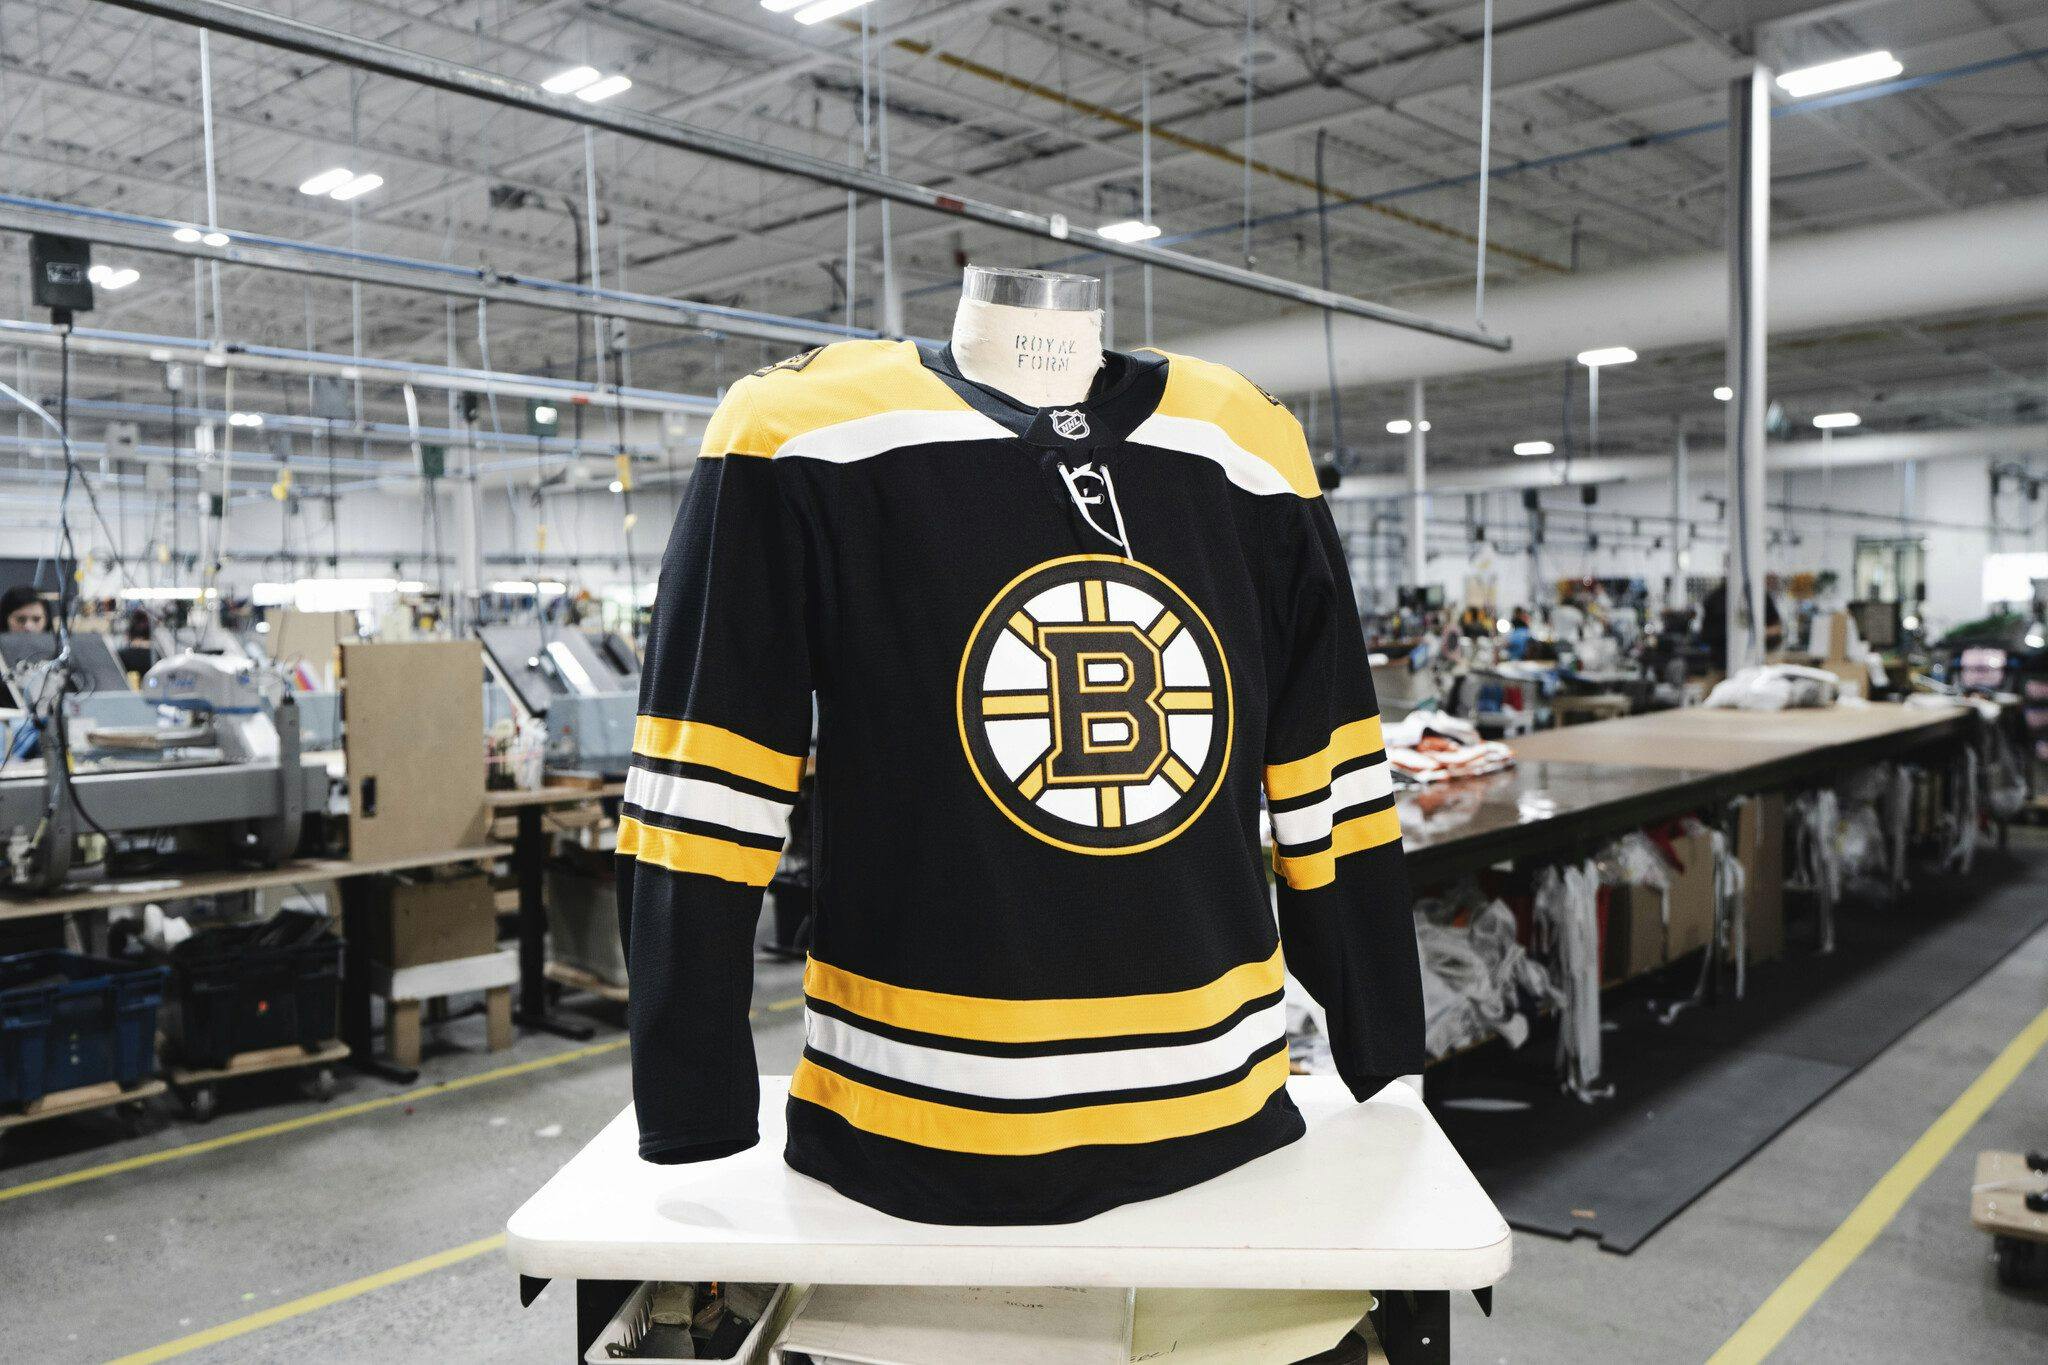 Boston Bruins return to modern uniforms as Fanatics takes over from Adidas